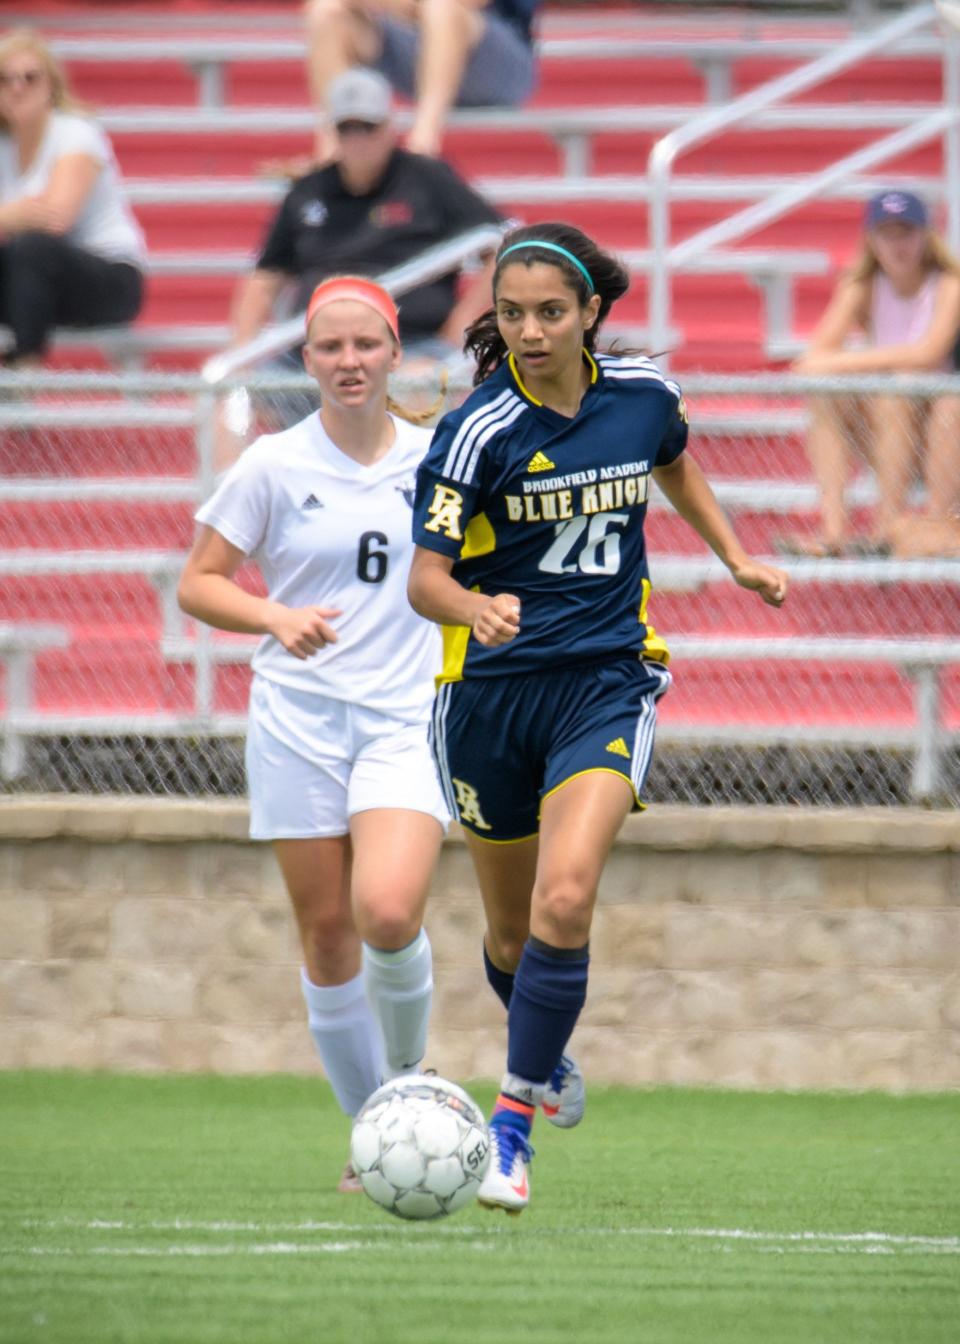 Anika Washburn was an all-state soccer player at Brookfield Academy.